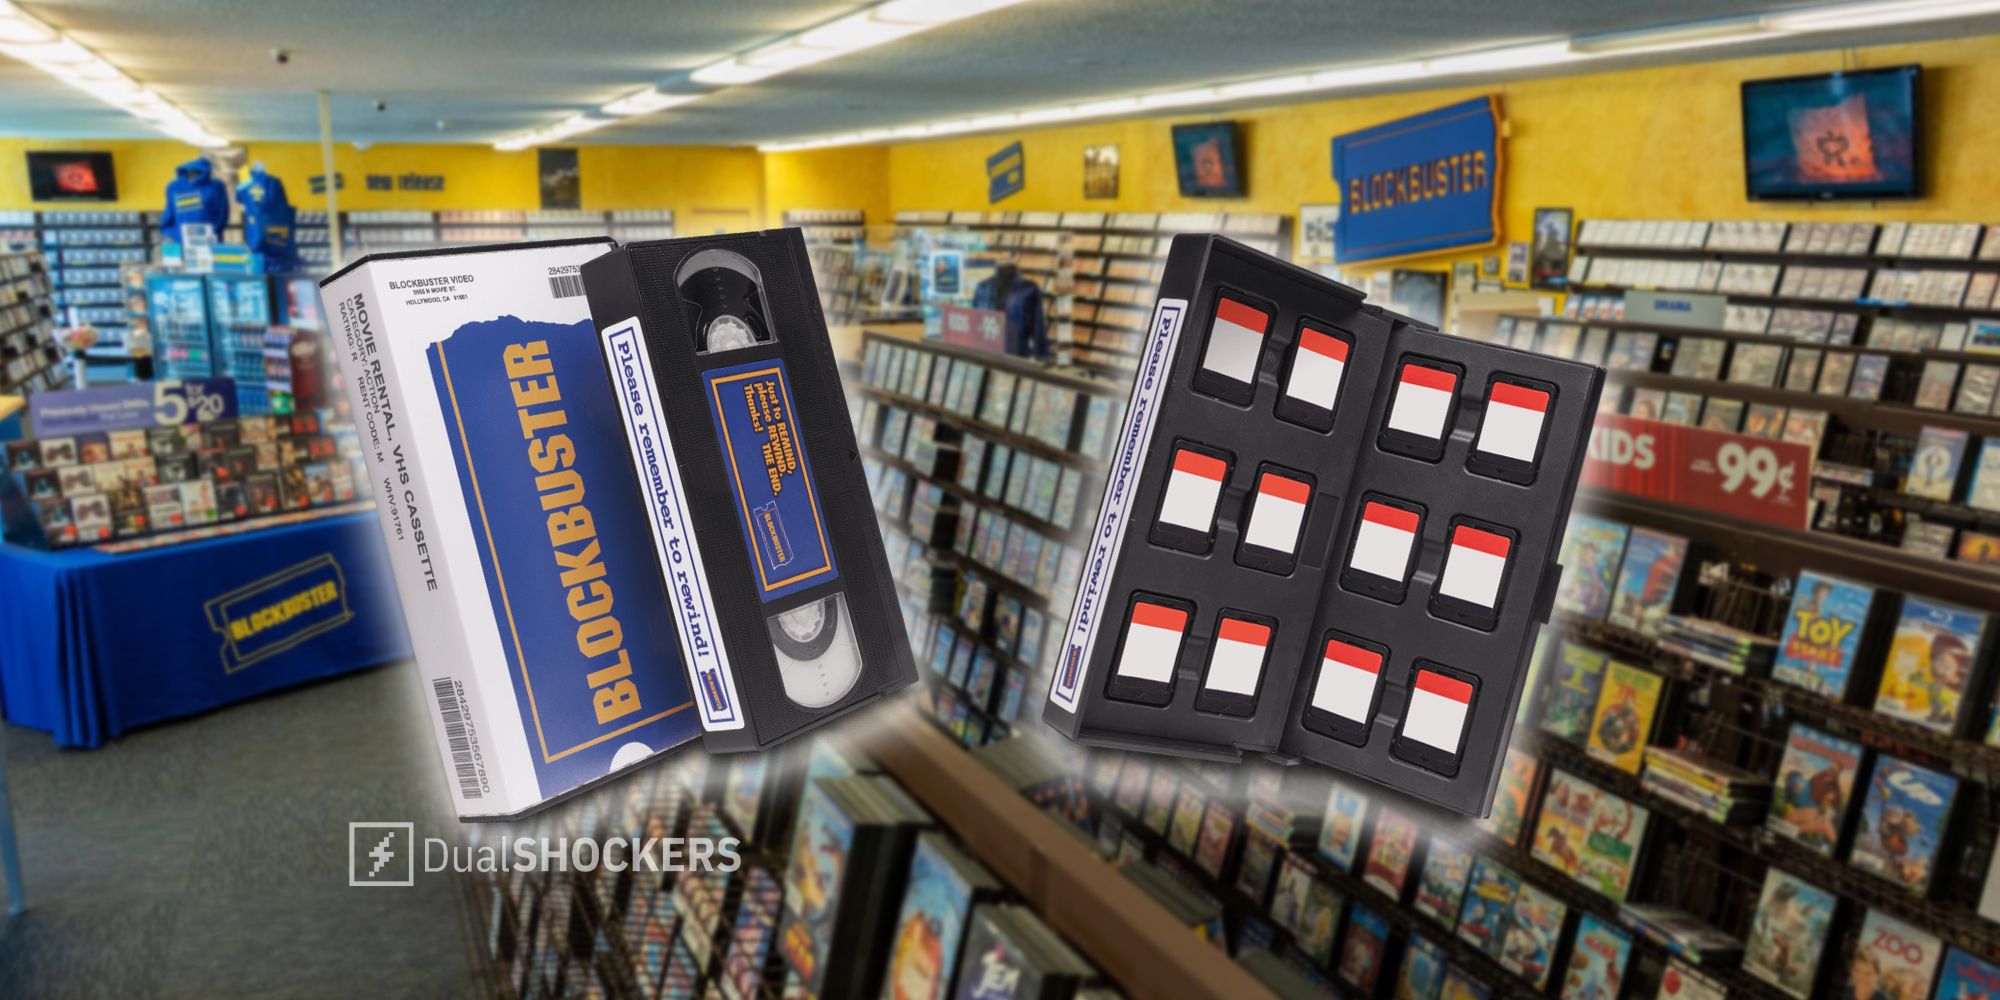 Blockbuster Switch Game Case and Blockbuster Video store